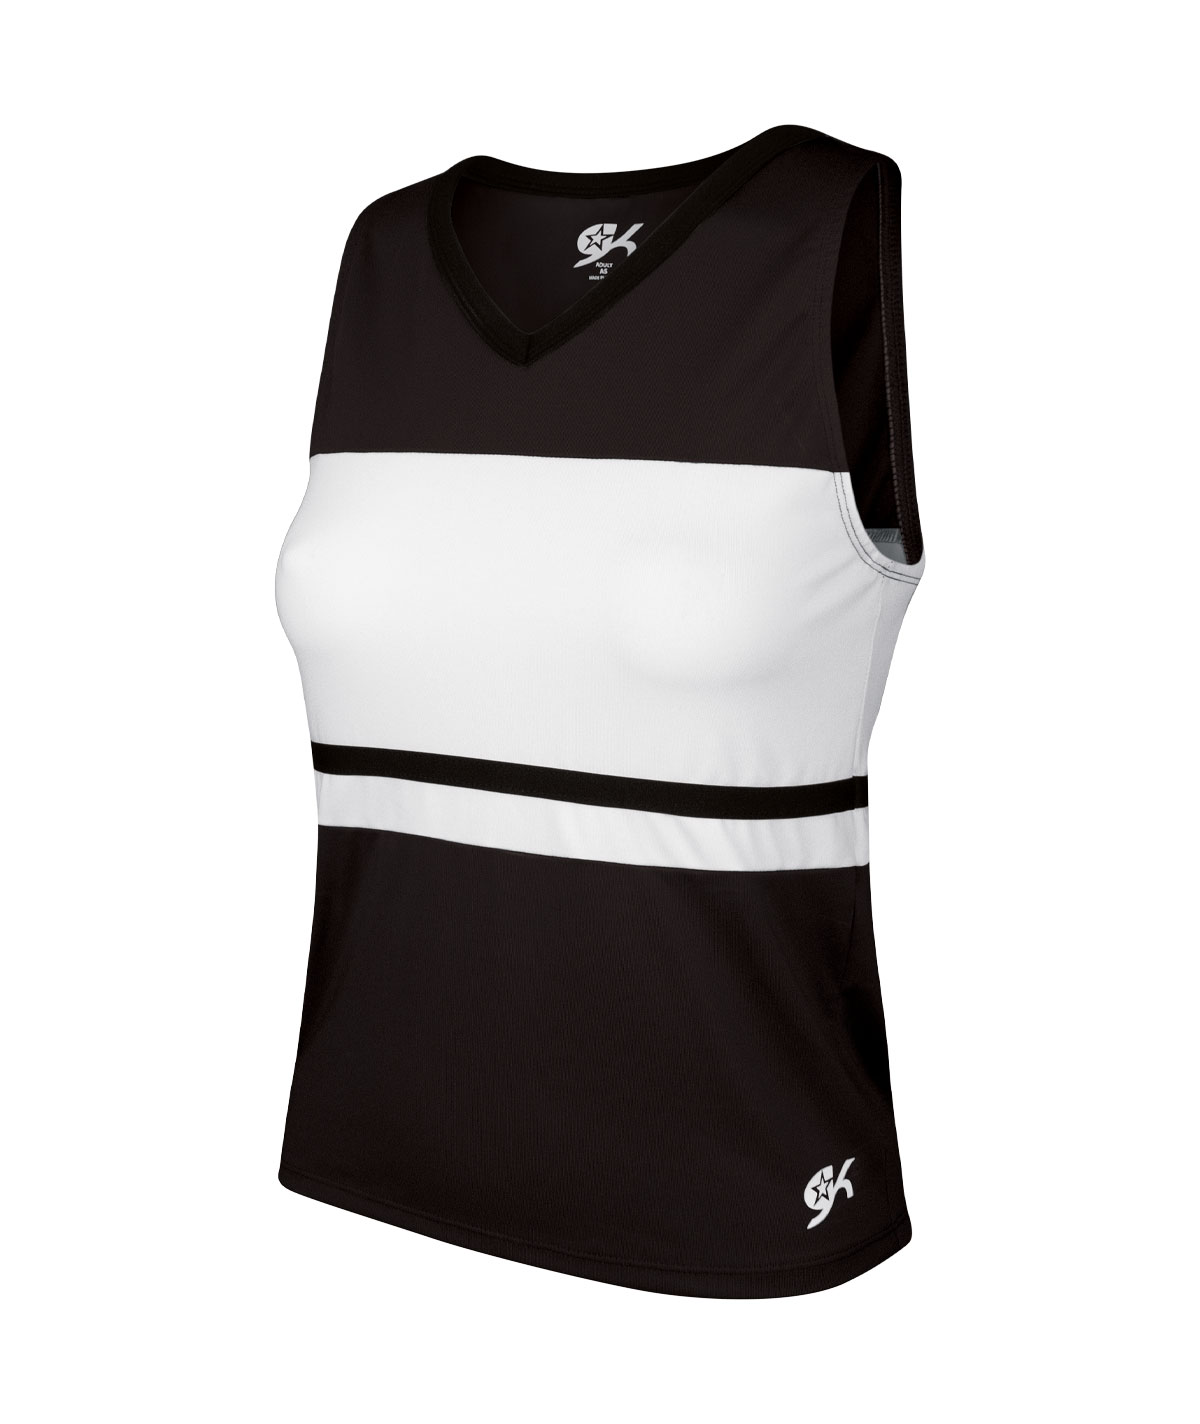 GK Fierce Sublimated Shell Top - Cheer Uniforms